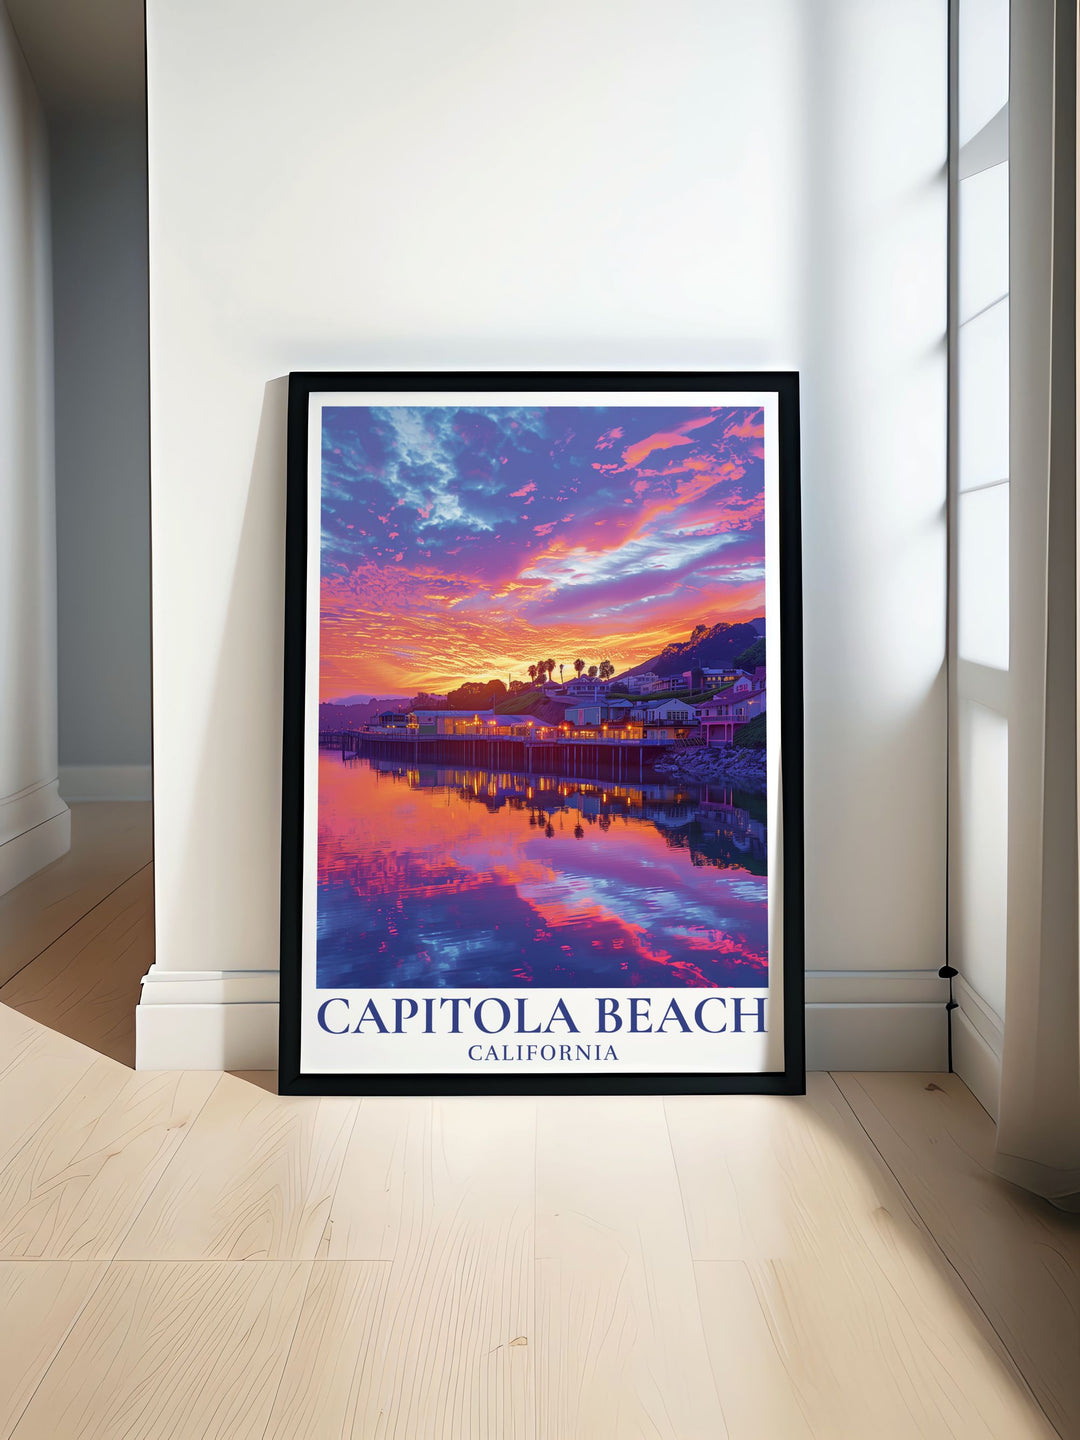 Vibrant Sunset over Capitola Wharf Travel Poster capturing Californias stunning coastal beauty perfect for home decor and gifts enhancing any living space with the warm hues and serene charm of Capitola Beach at sunset